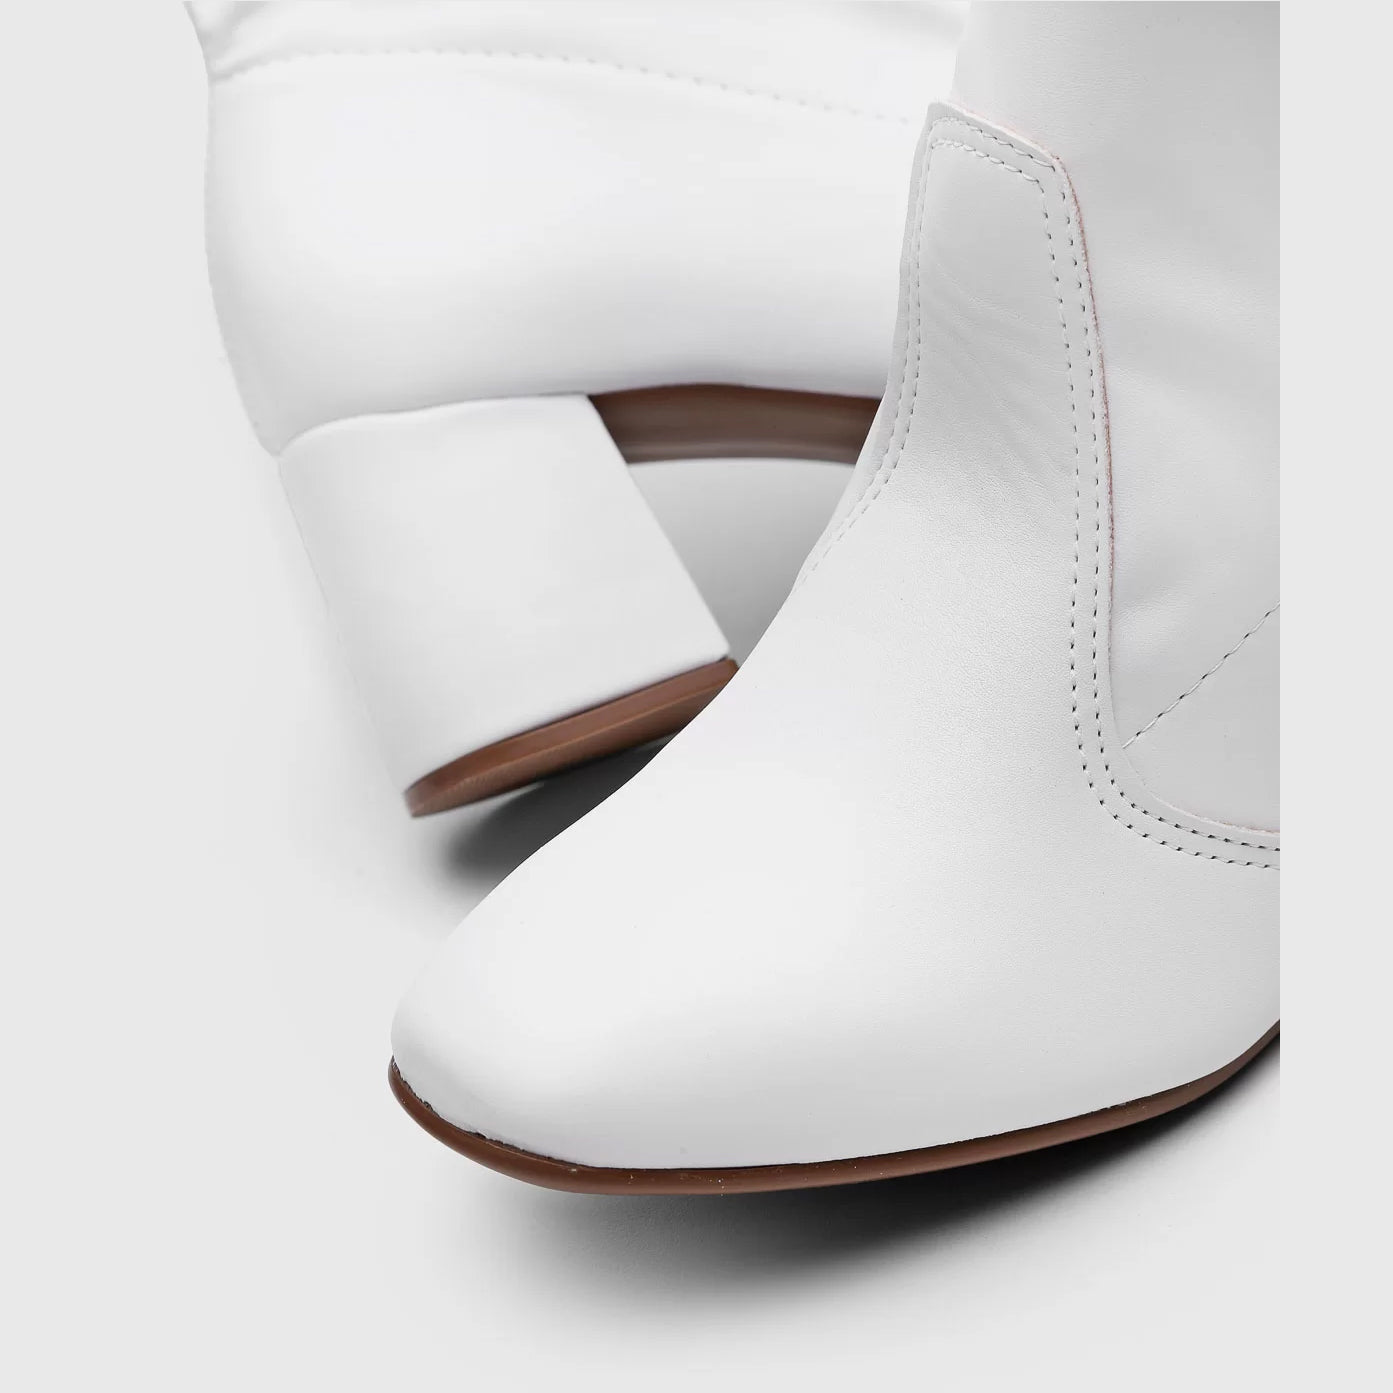 Beira Rio 9076-100 Block Heel Ankle Boot in White Napa Stretch